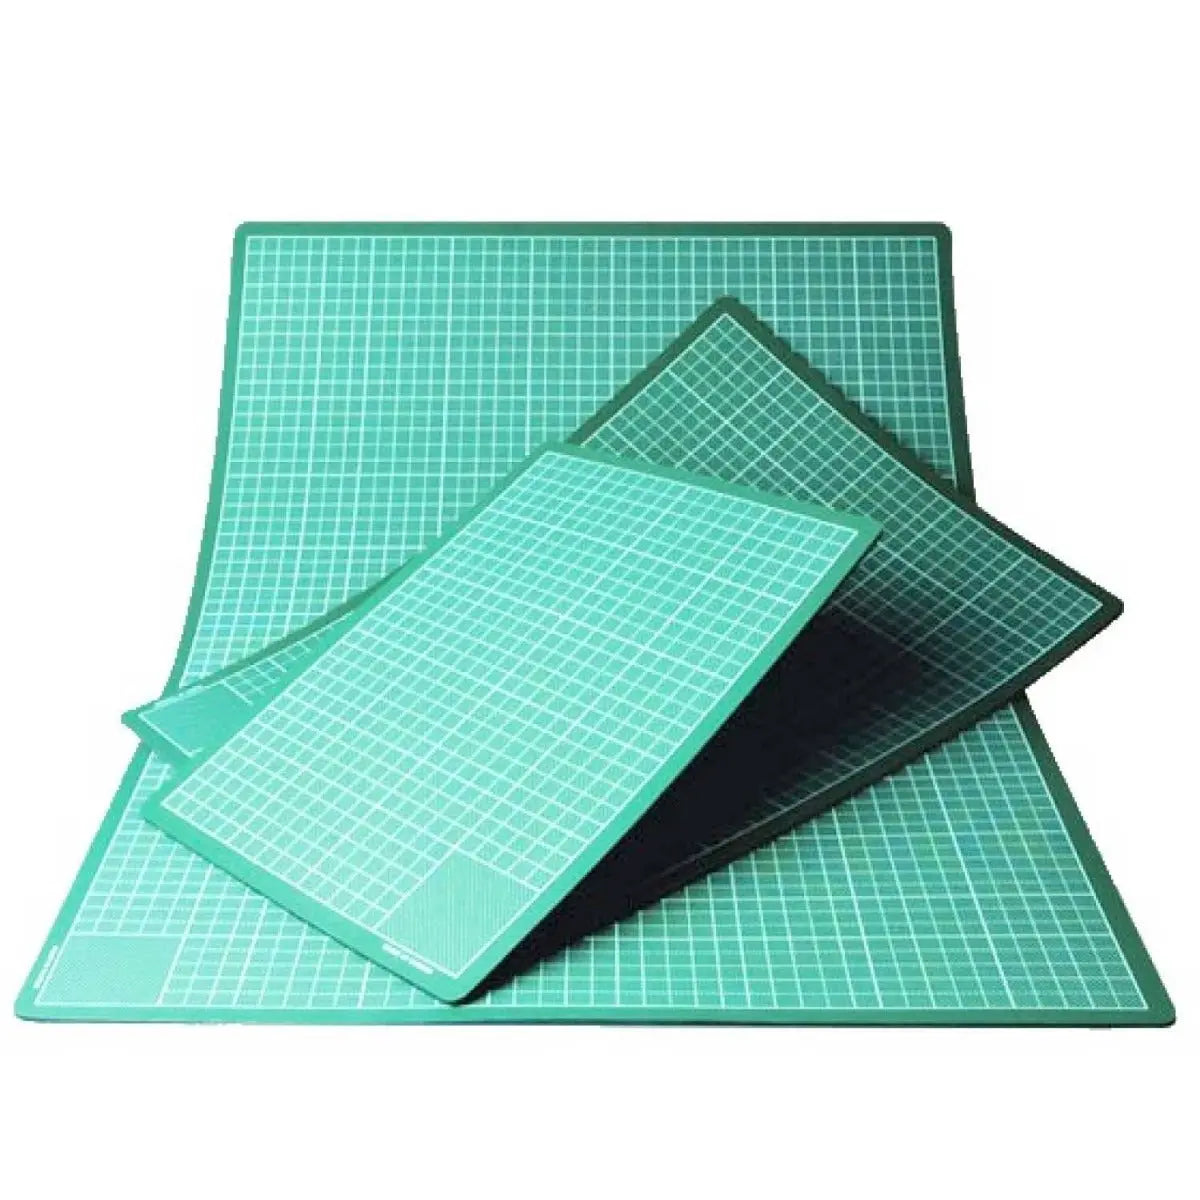 Olfa self-healing cutting mats designed to take the wear and tear that your rotary cutting blades